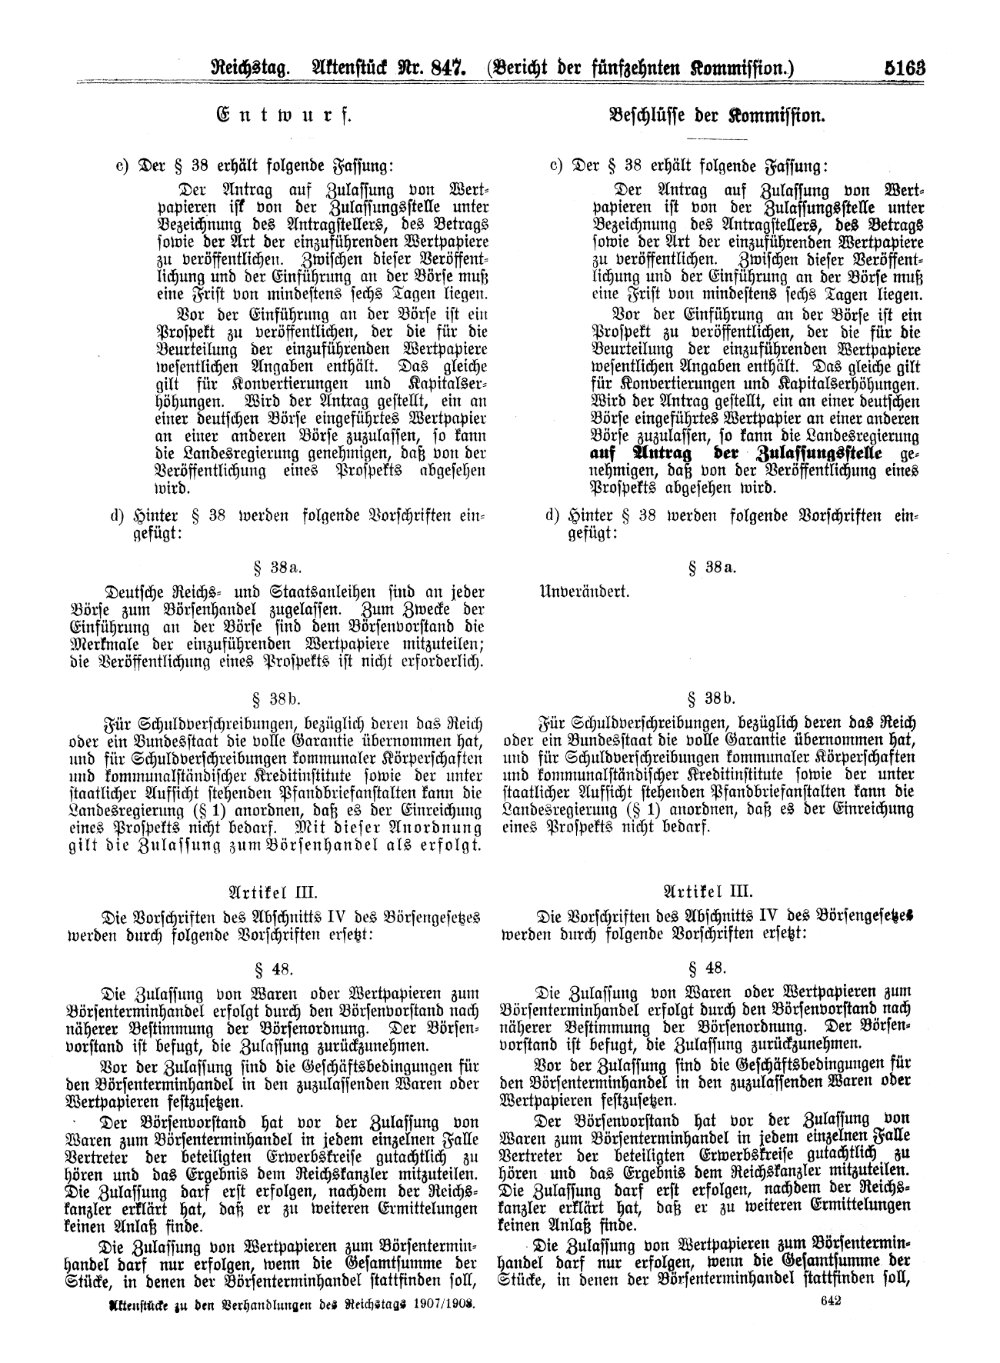 Scan of page 5163